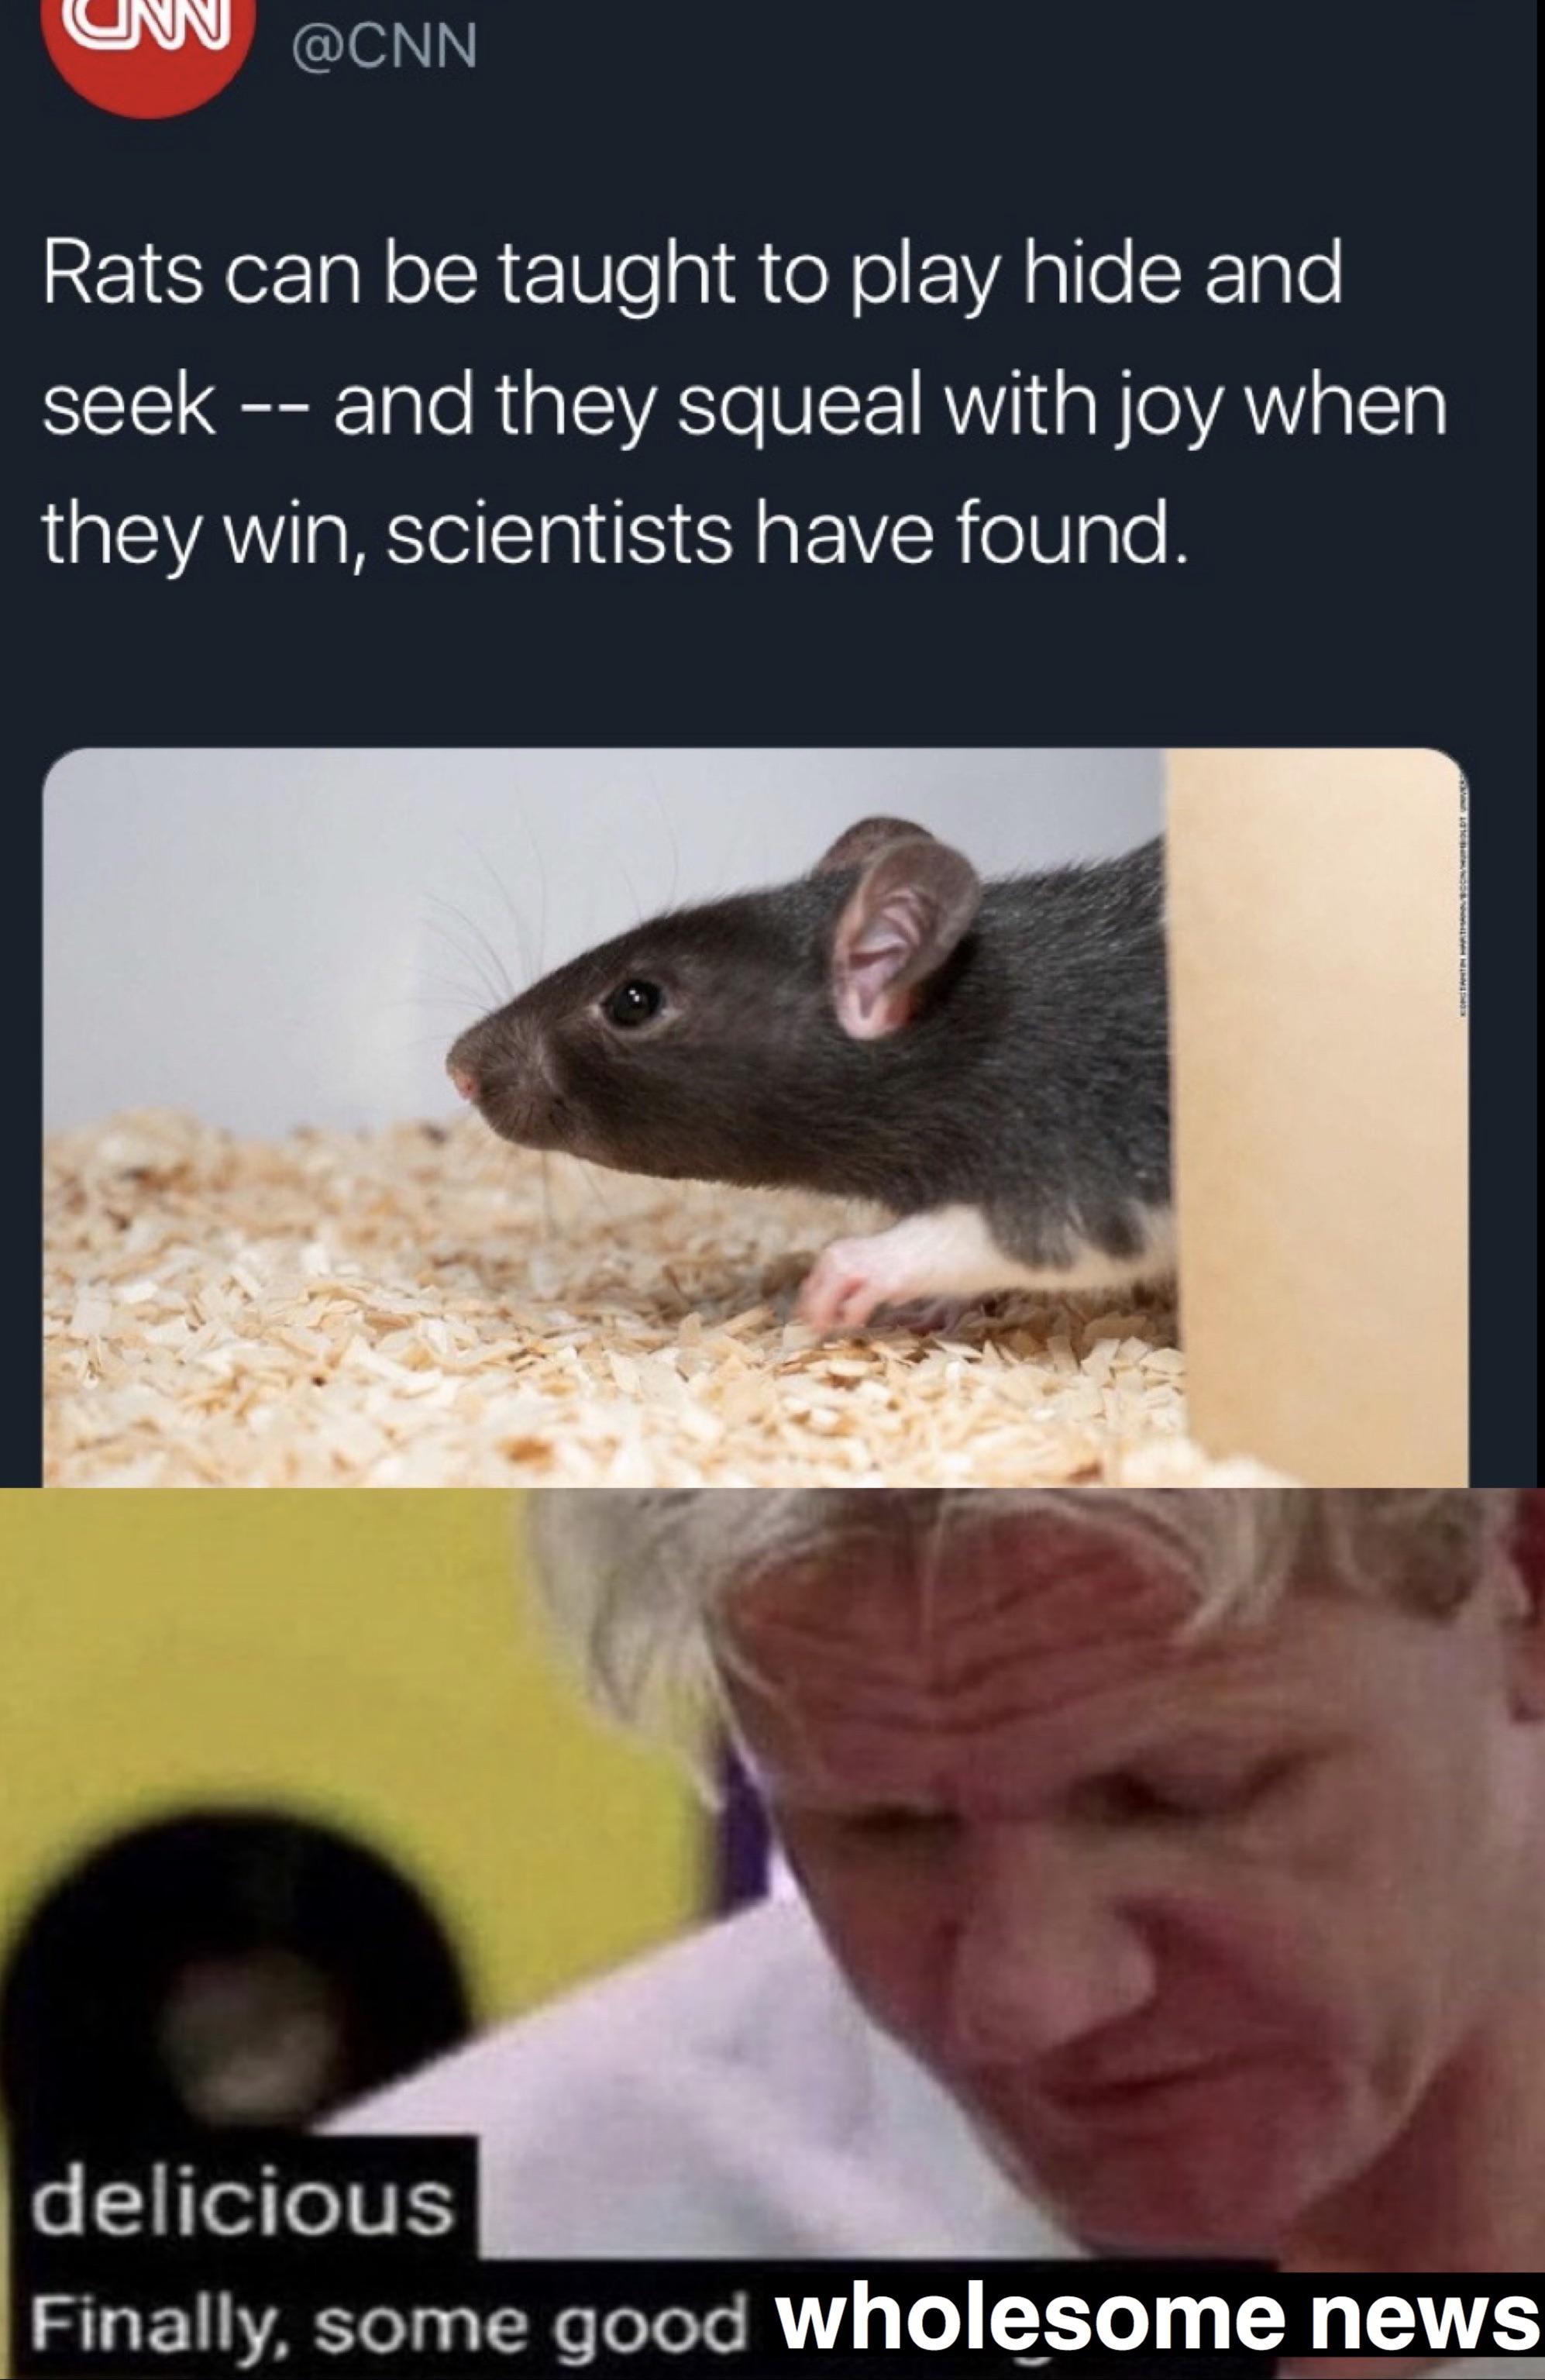 cute wholesome-memes cute text: @CNN Rats can be taught to play hide and seek -- and they squeal with joy when they win, scientists have found. delicious wholesome news Finally. some good 